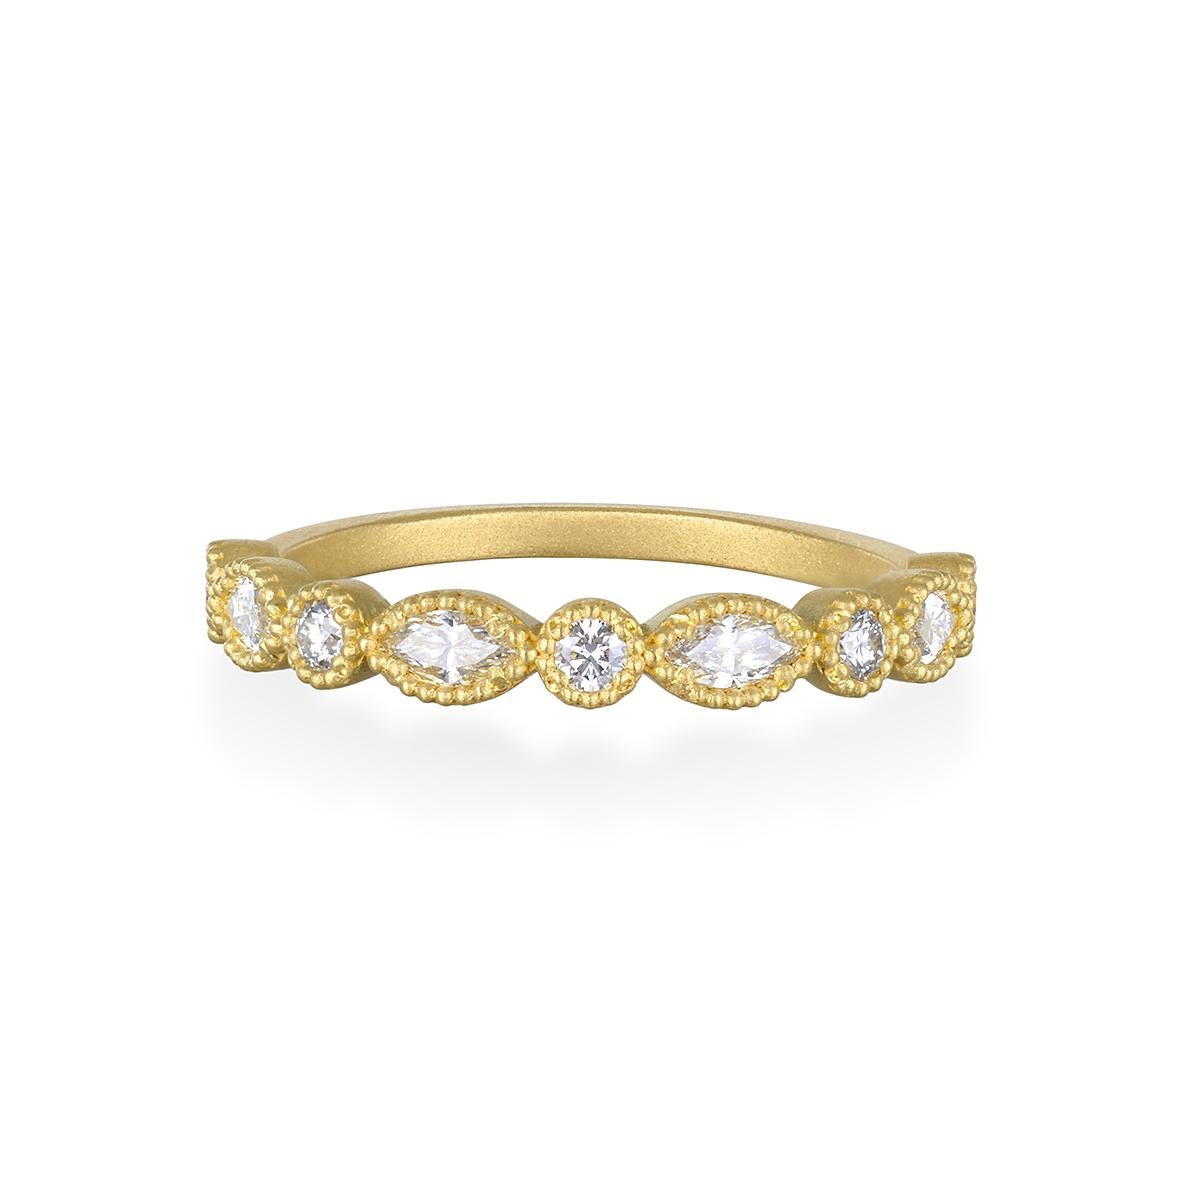 Worn alone or stacked, Faye Kim's 18 Karat Gold Marquise/Round Diamond Half Eternity Band would be a great addition to your jewelry collection. 

Classic half eternity band with a Milgrain edge detail, the bright white diamonds, with their